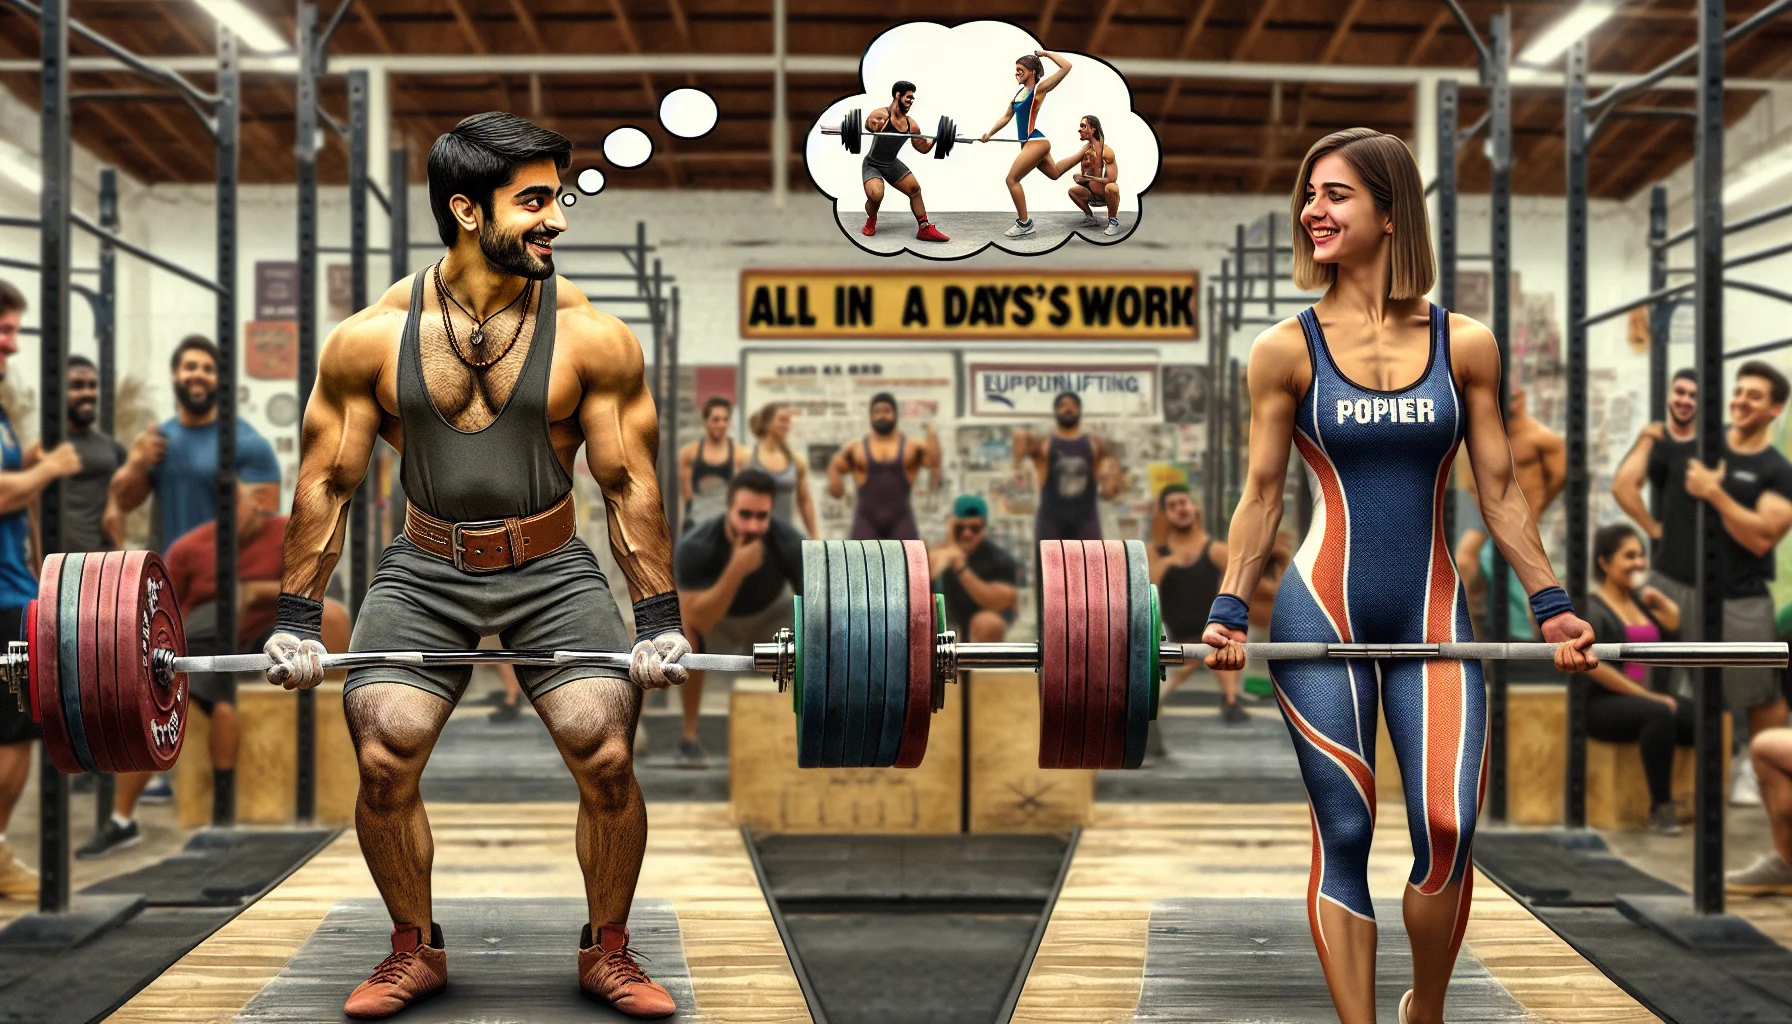 Generate a humorous, realistic image that compares raw and equipped powerlifting. Picture a gym scenario where on one side, a South Asian man is engaged in raw powerlifting. He is lifting heavy barbells with visible strain, exhibiting intense concentration and determination, but also a lighthearted expression on his face. His clothes are simple - a sleeveless t-shirt and shorts, typical of a raw powerlifter. On the other side, a Caucasian woman, adorned in the powerlifting suit integral to equipped powerlifting, effortlessly lifts an even heavier barbell. She's smiling, enjoying the moment. A thought bubble above her heads reads, 'All in a day's work'. This marketplace gallery provides a playful comparison between the two powerlifting styles, endorsing the idea that exercise can be both challenging and enjoyable.